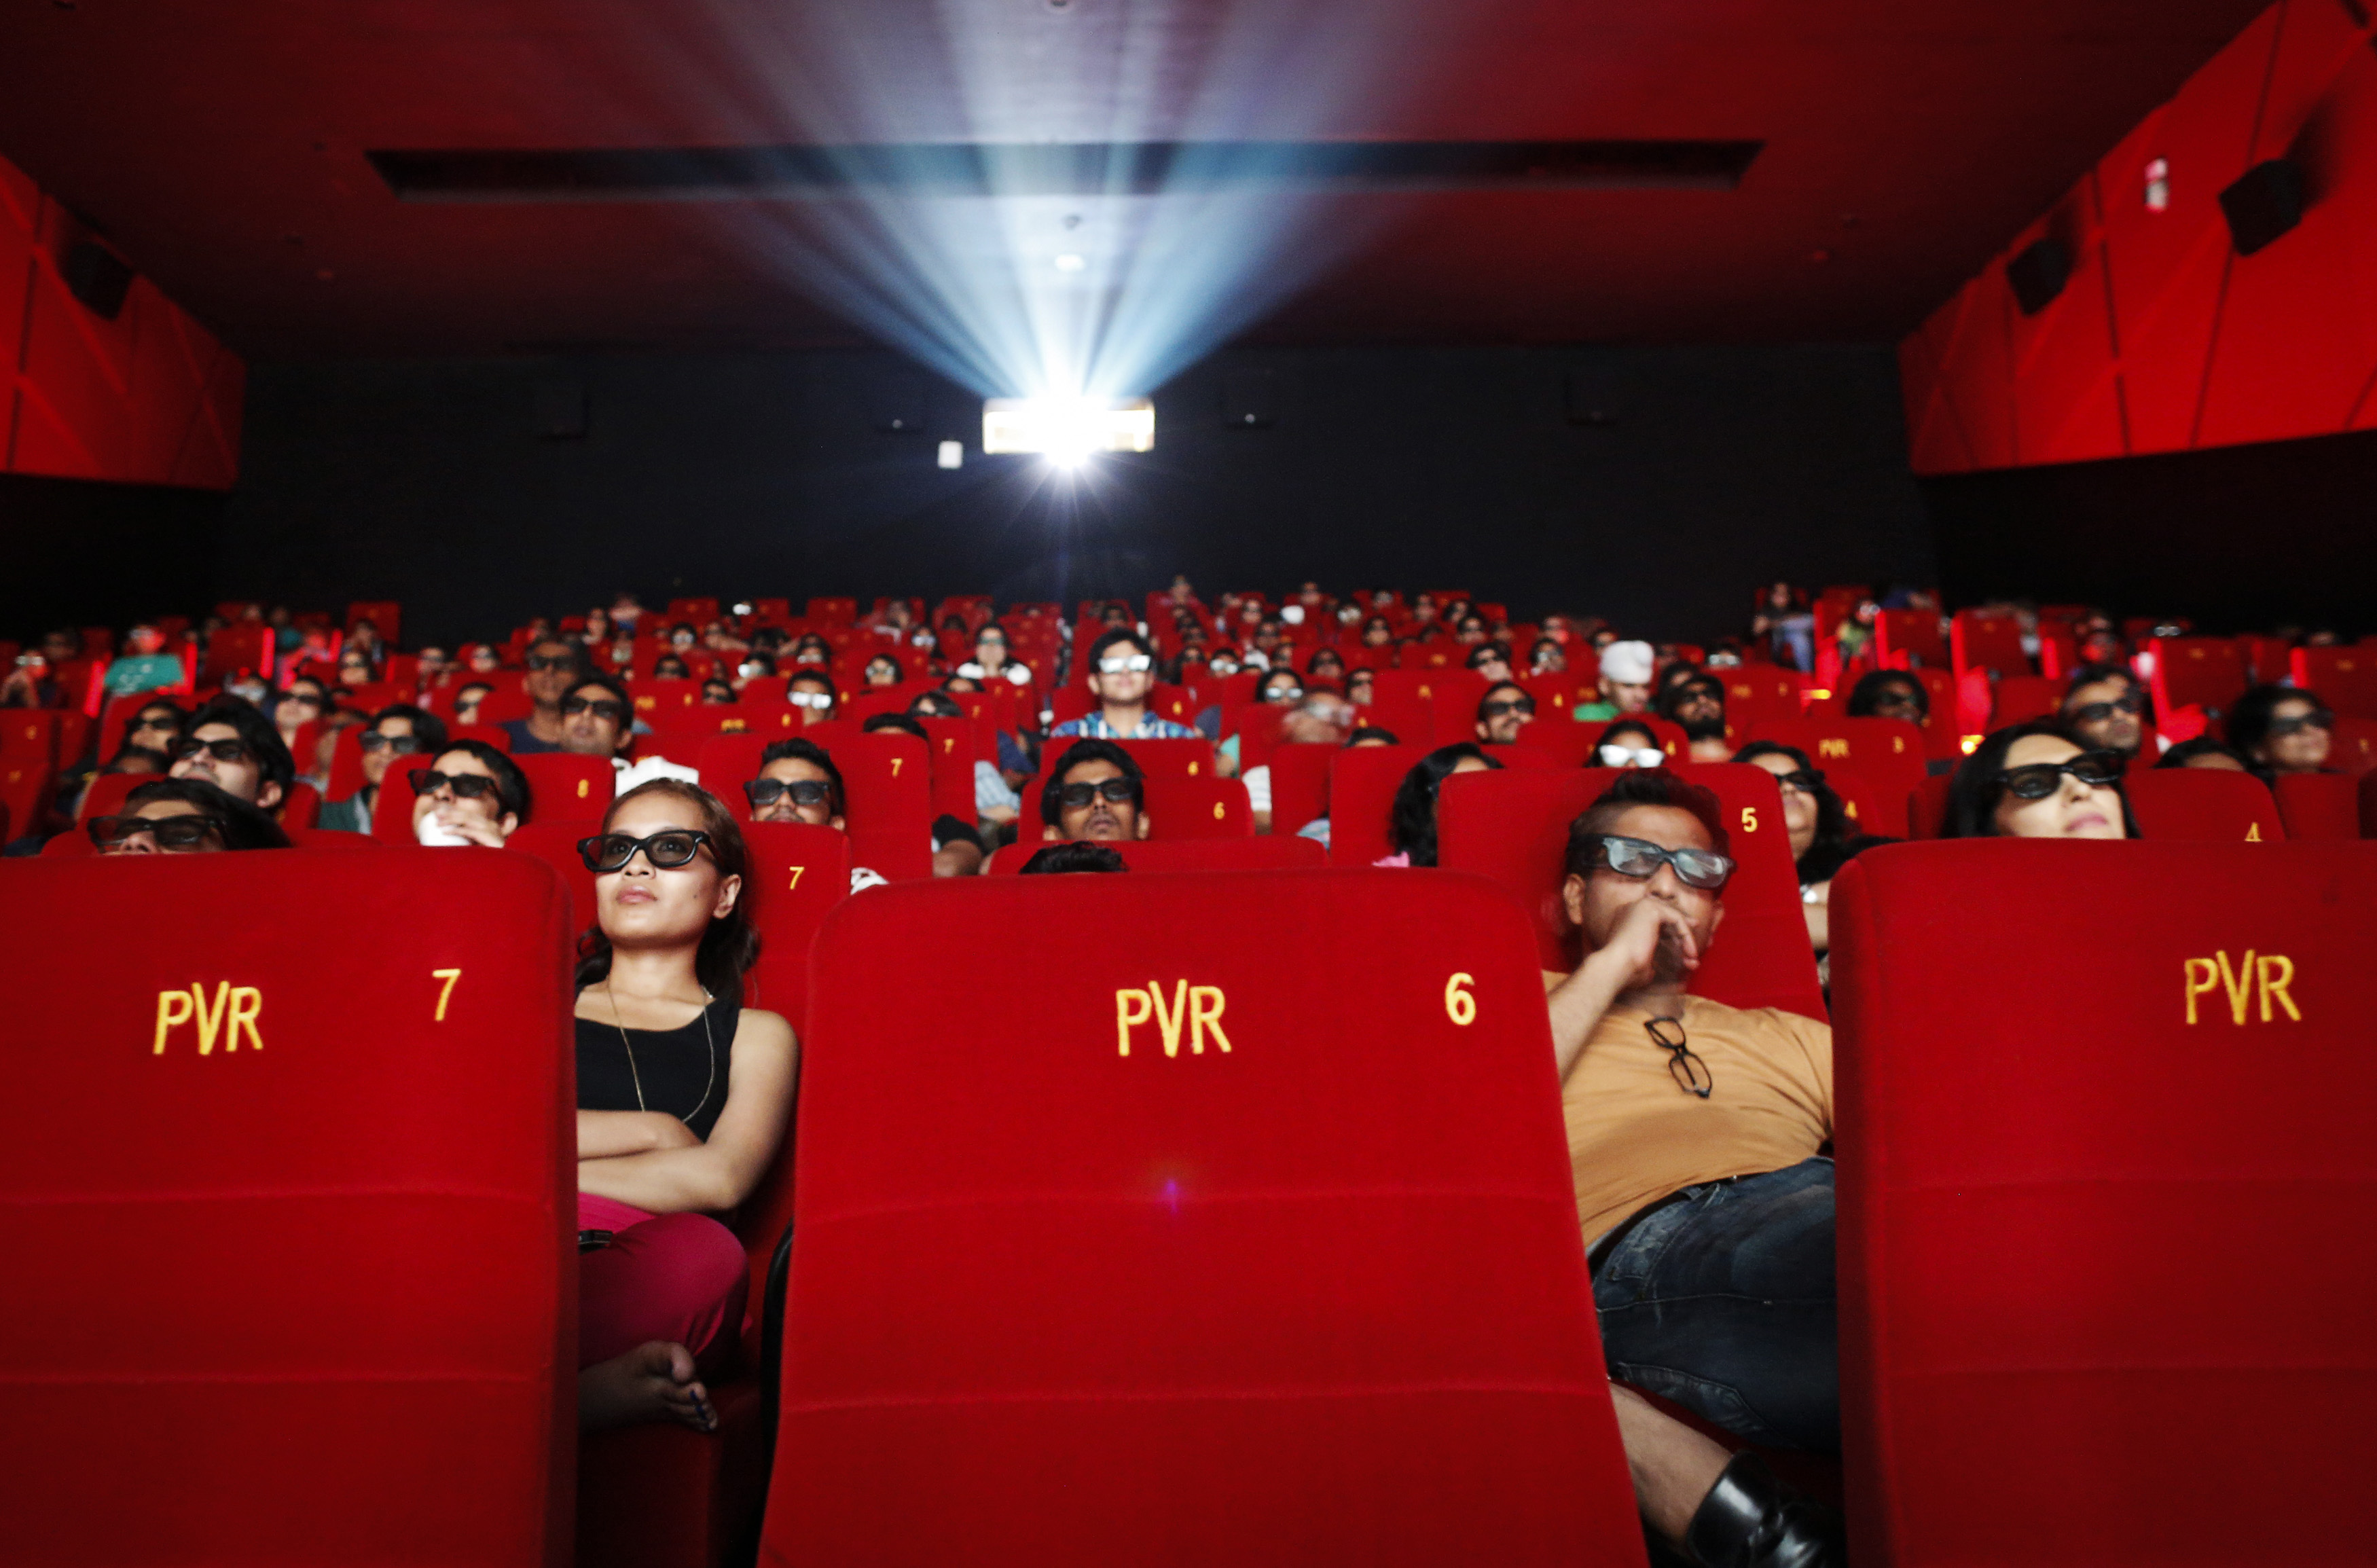 Cinema-goers wearing 3D glasses watch a movie at a PVR Multiplex in Mumbai November 10, 2013. Multiplex operators like PVR Ltd, Inox Leisure, Reliance Mediaworks and Mexican chain Cinepolis are scrambling to set up theatres targeting the rapidly growing number of middle-class Indians willing to pay to watch Bollywood movies in more comfortable surroundings. The potential is huge, provided operators can find the right location in a country where prime urban real estate is costly and in short supply. Picture taken November 10, 2013.       To match MULTIPLEX-INDIA/        REUTERS/Danish Siddiqui (INDIA - Tags: SOCIETY BUSINESS ENTERTAINMENT) - GM1E9BK0DED01